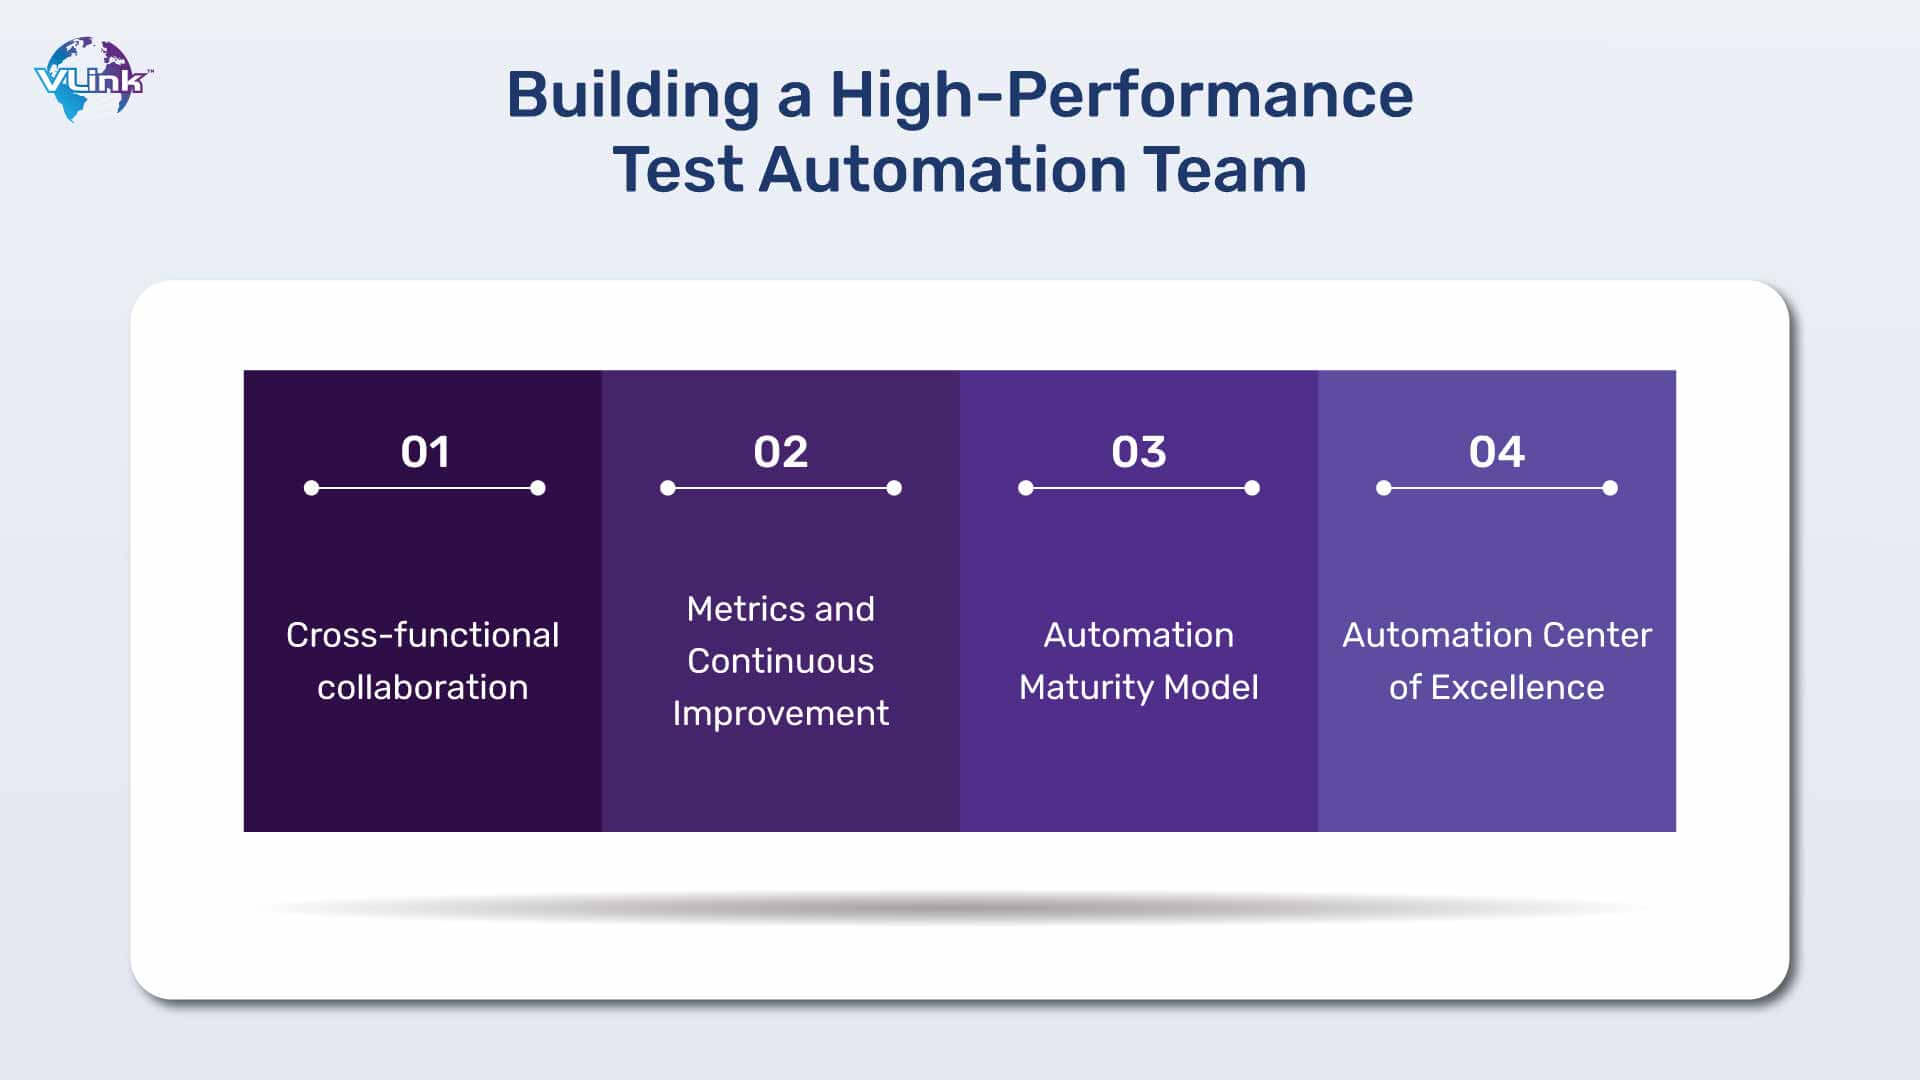 Building a High-Performance Test Automation Team